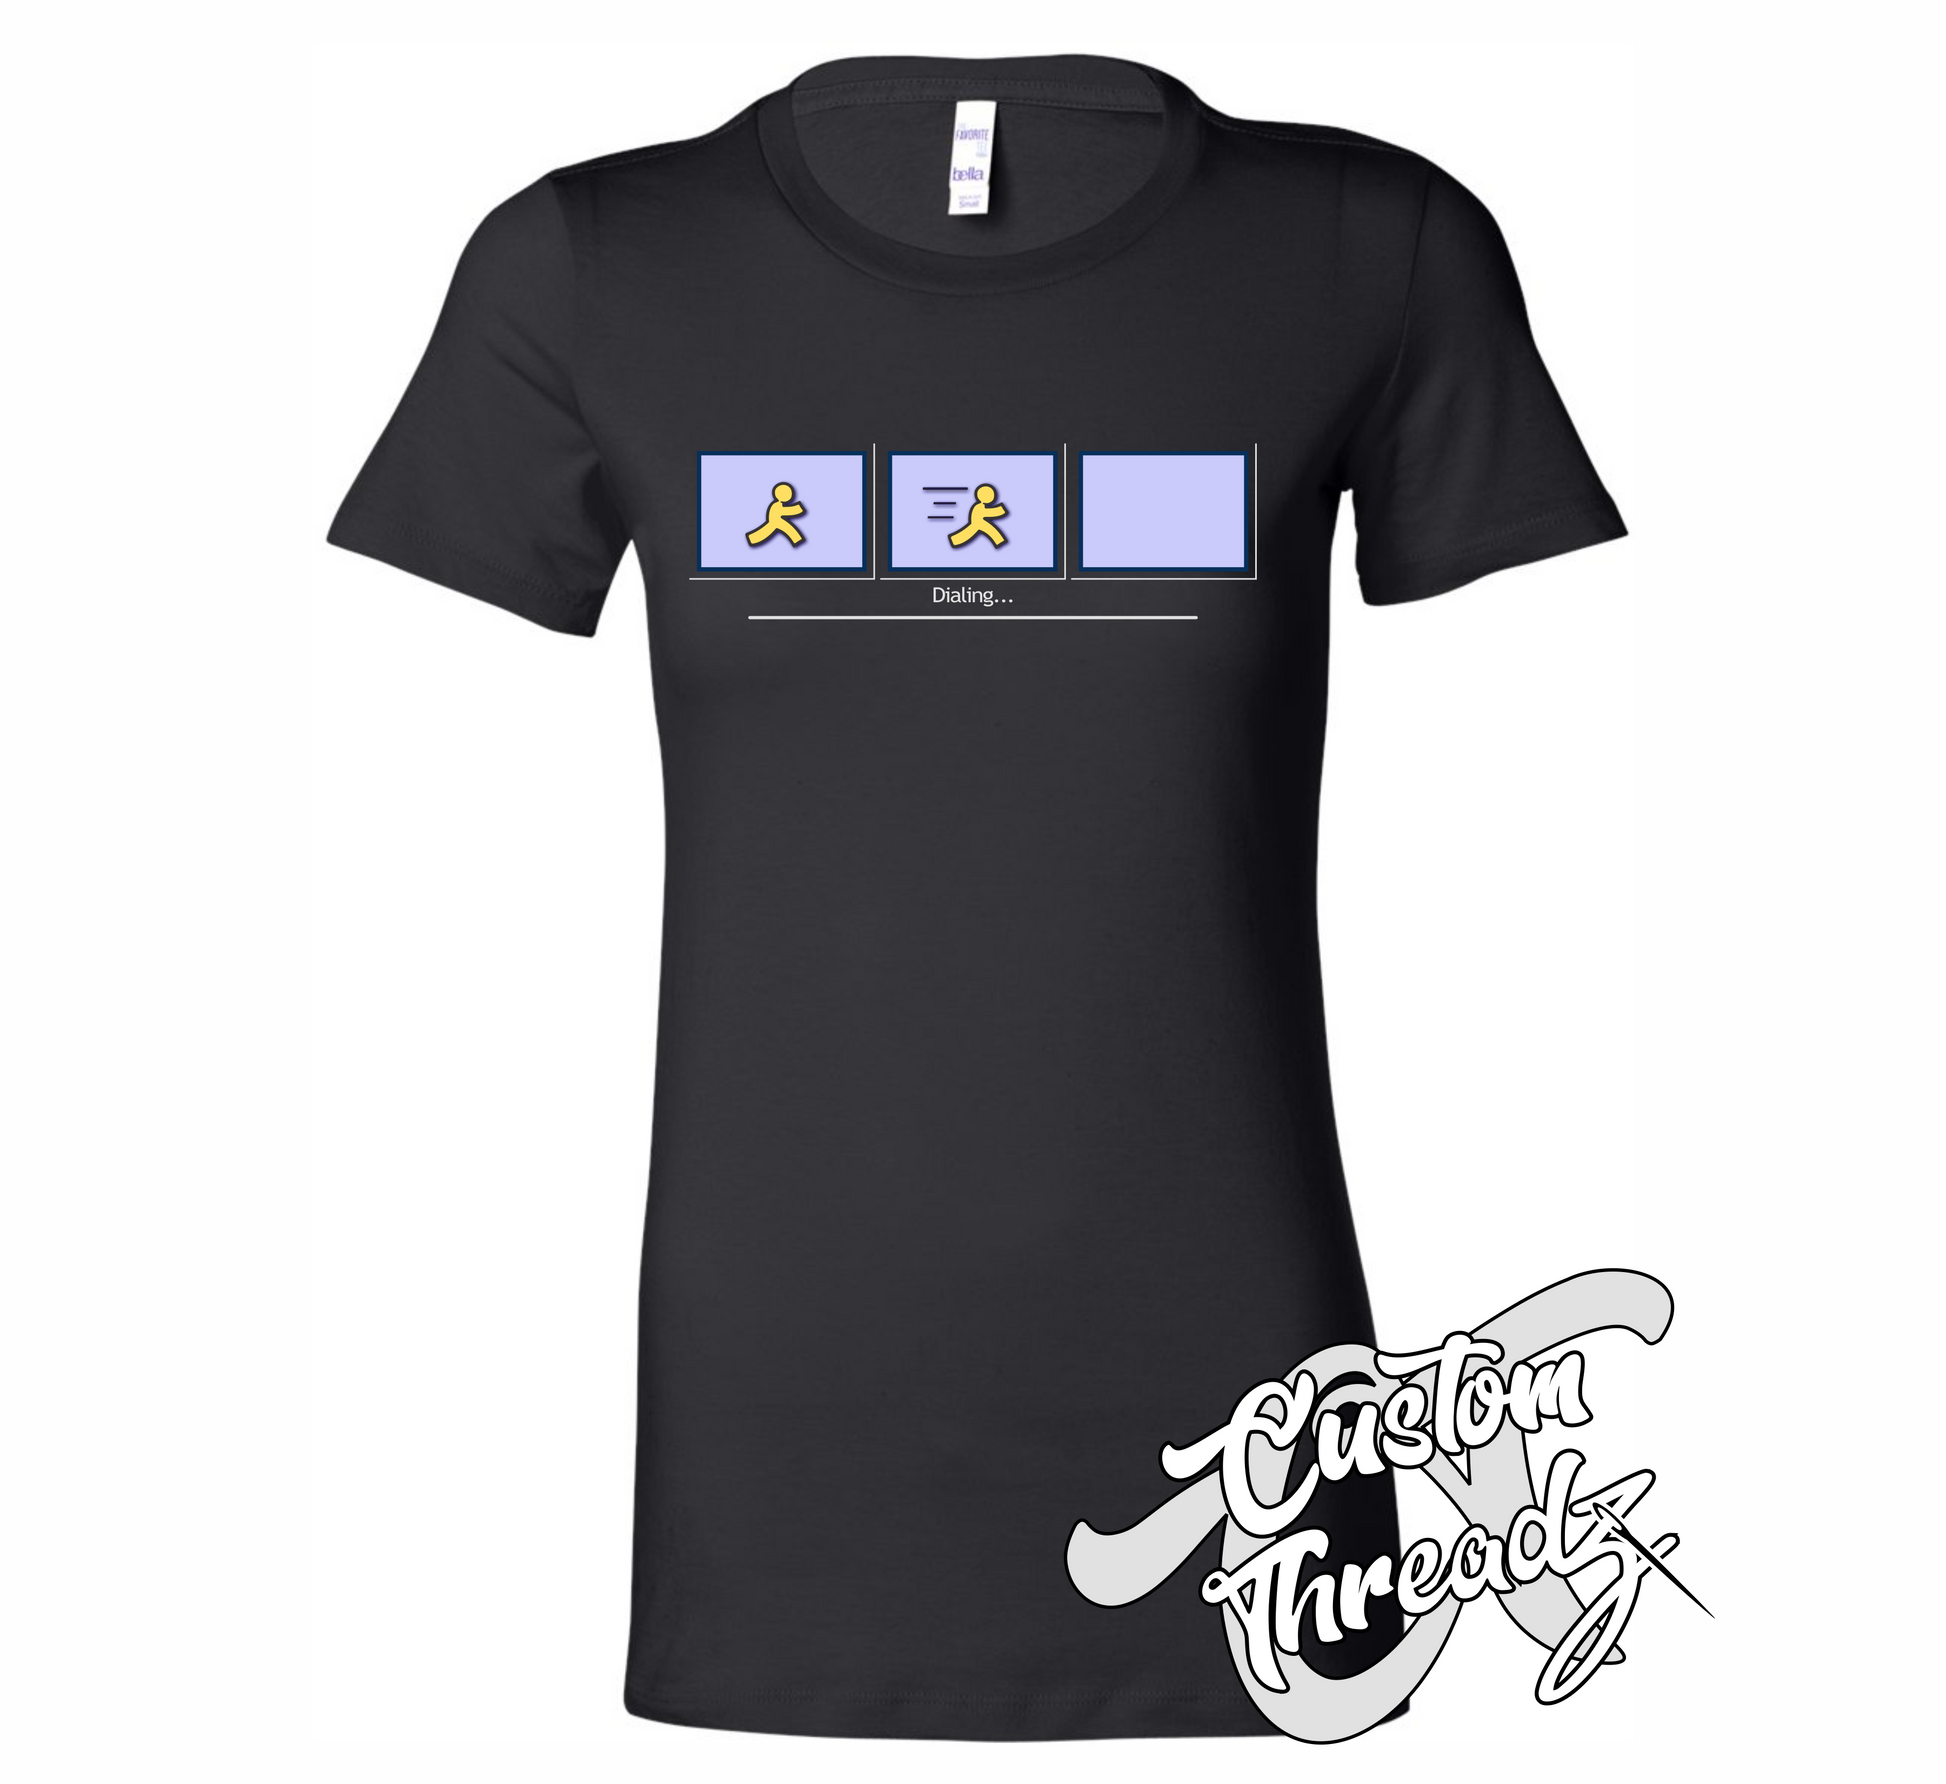 black womens tee with AOL dial up DTG printed design